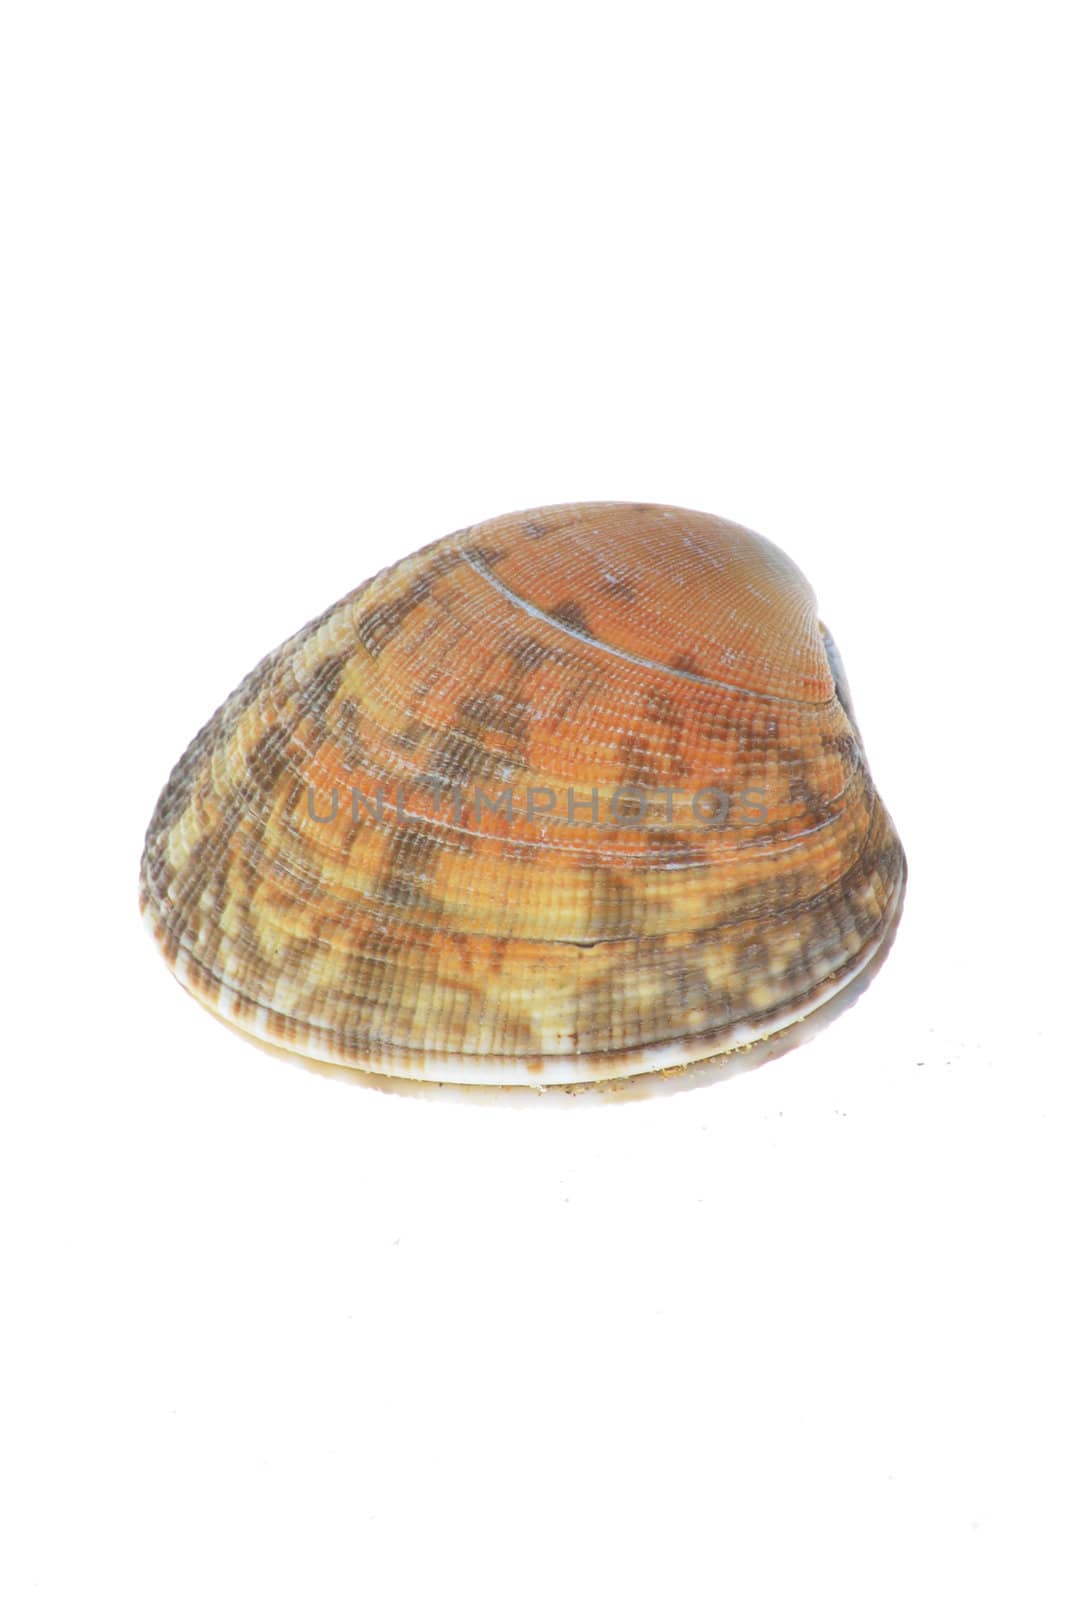 Sea Shell on white Background